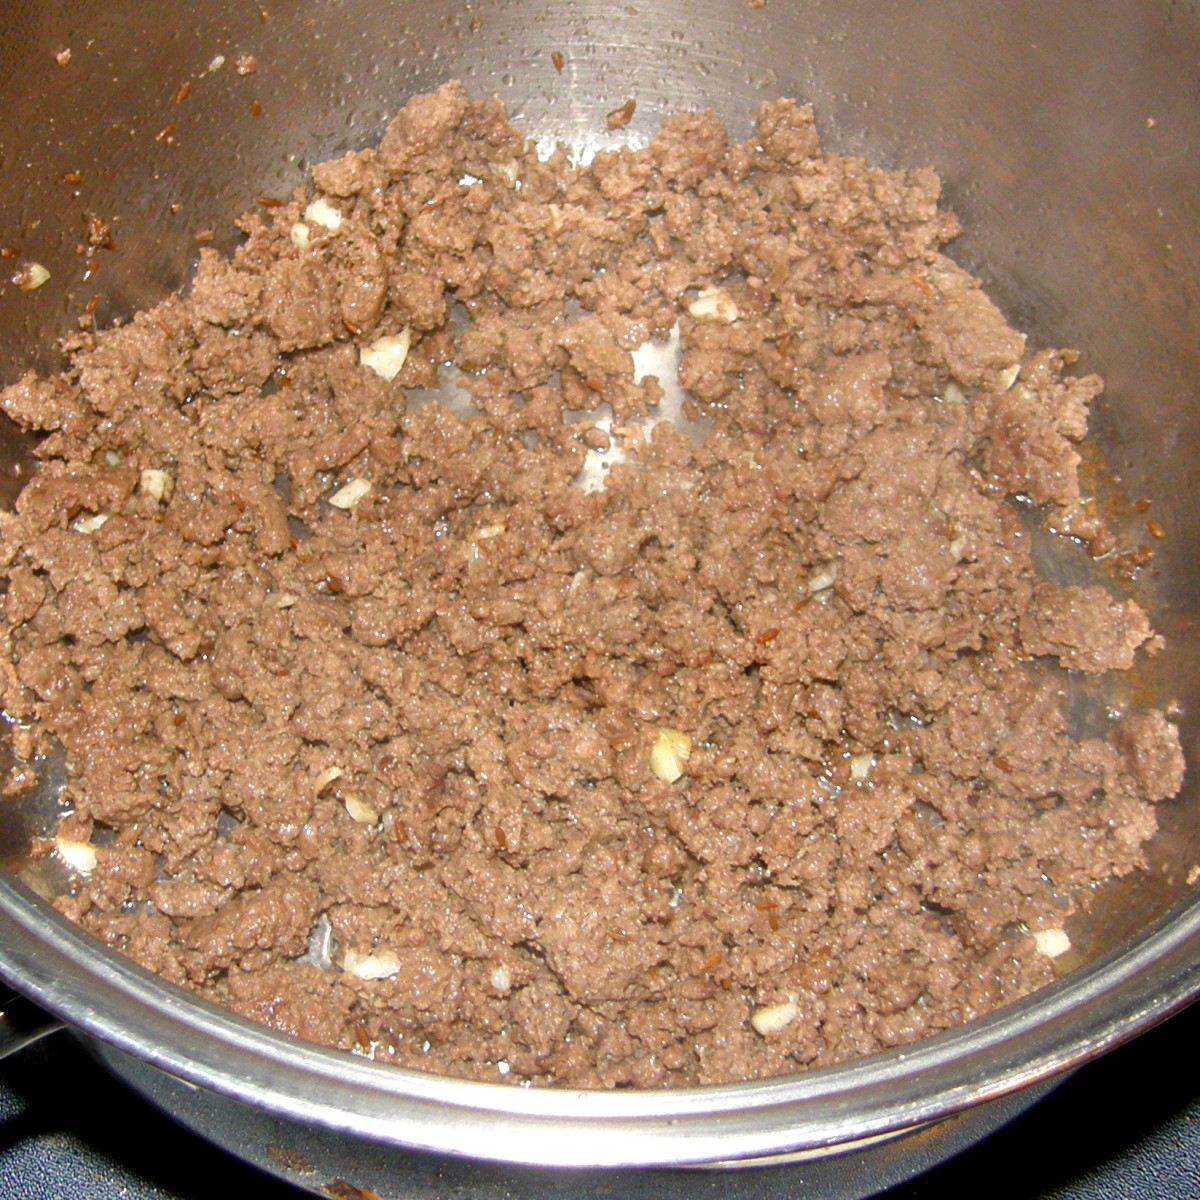 In a large pan (or pot) over medium heat, melt the butter & cook the ground beef until brown.  Add in your seasoning and spices.